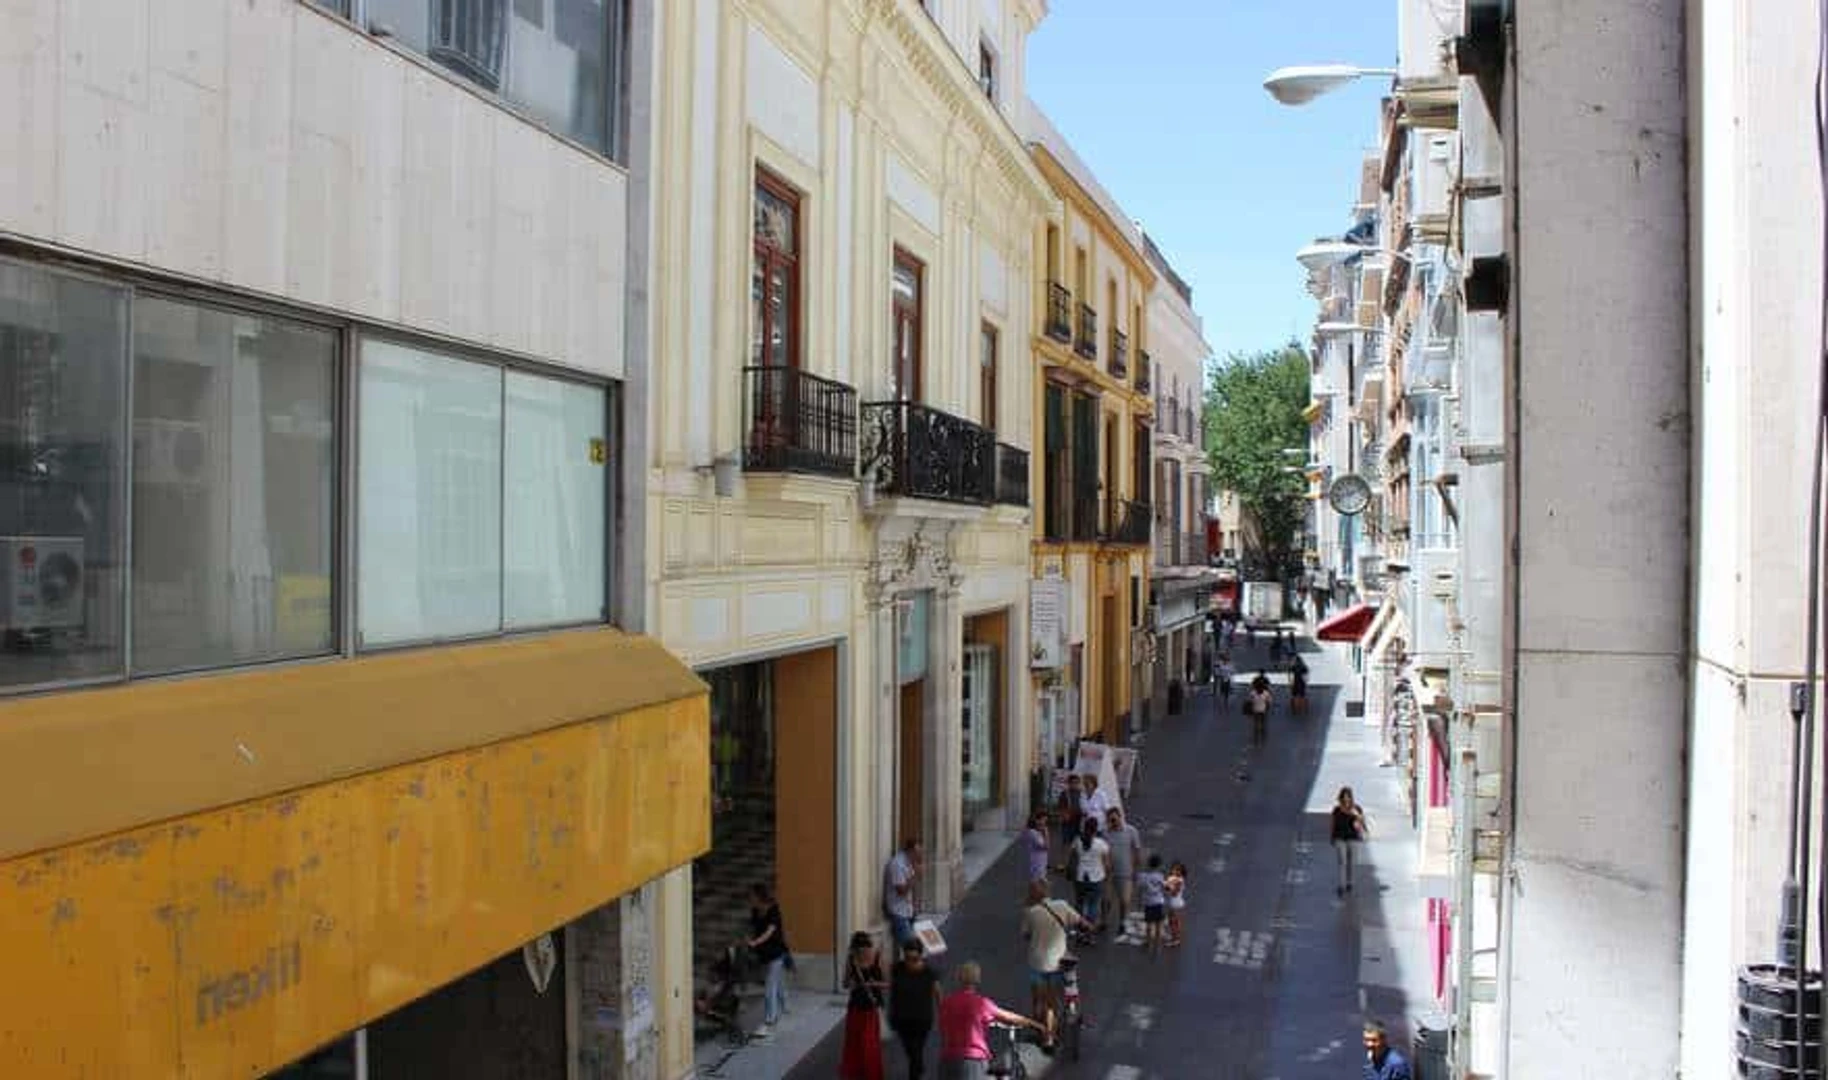 Renting rooms by the month in Seville